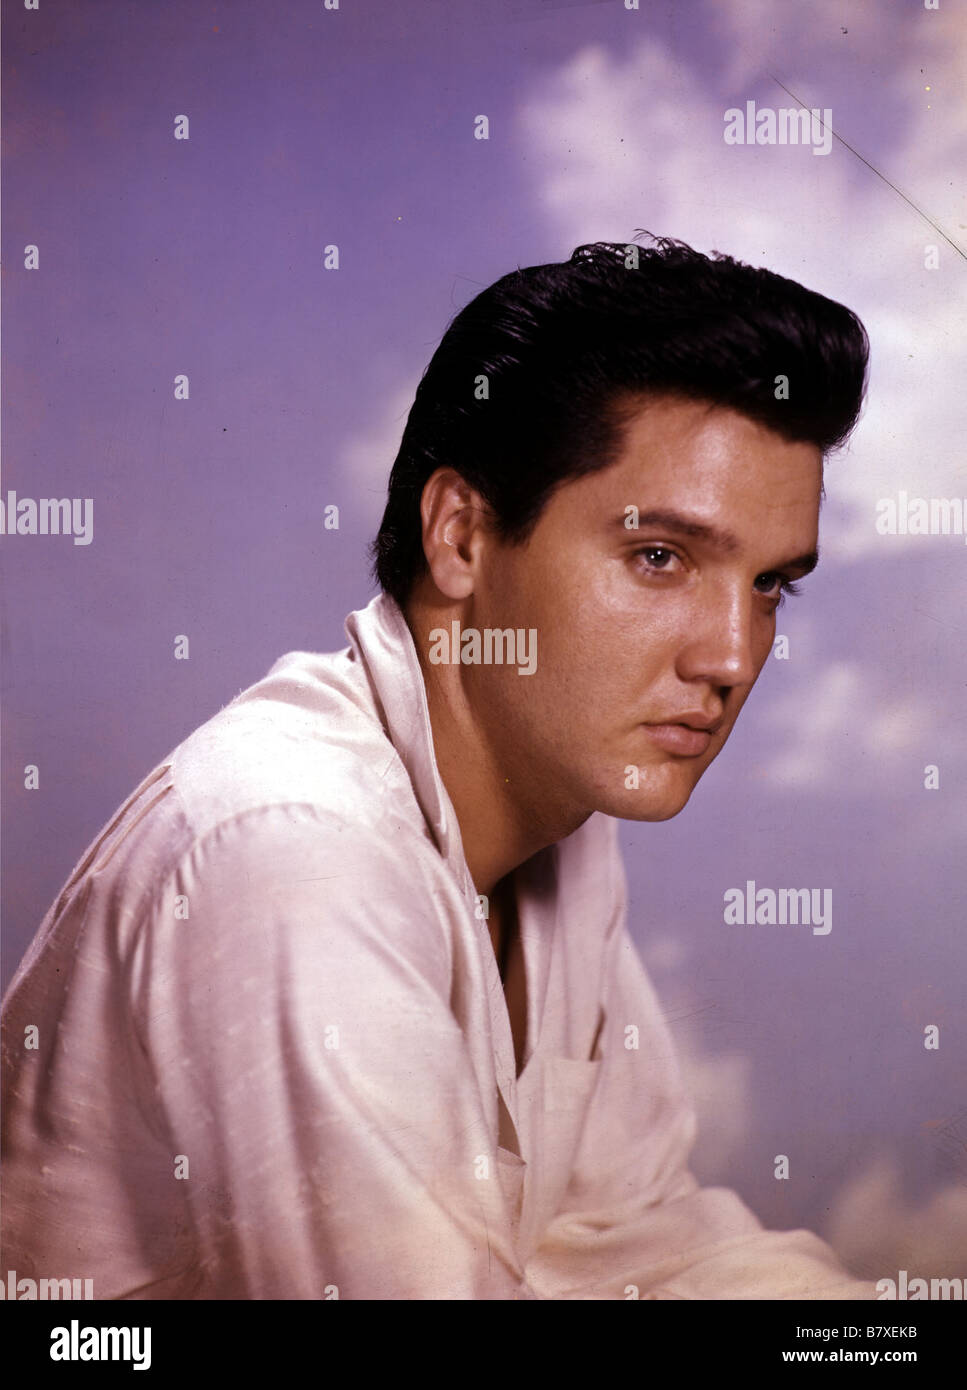 Elvis Presley a American singer and actor Stock Photo